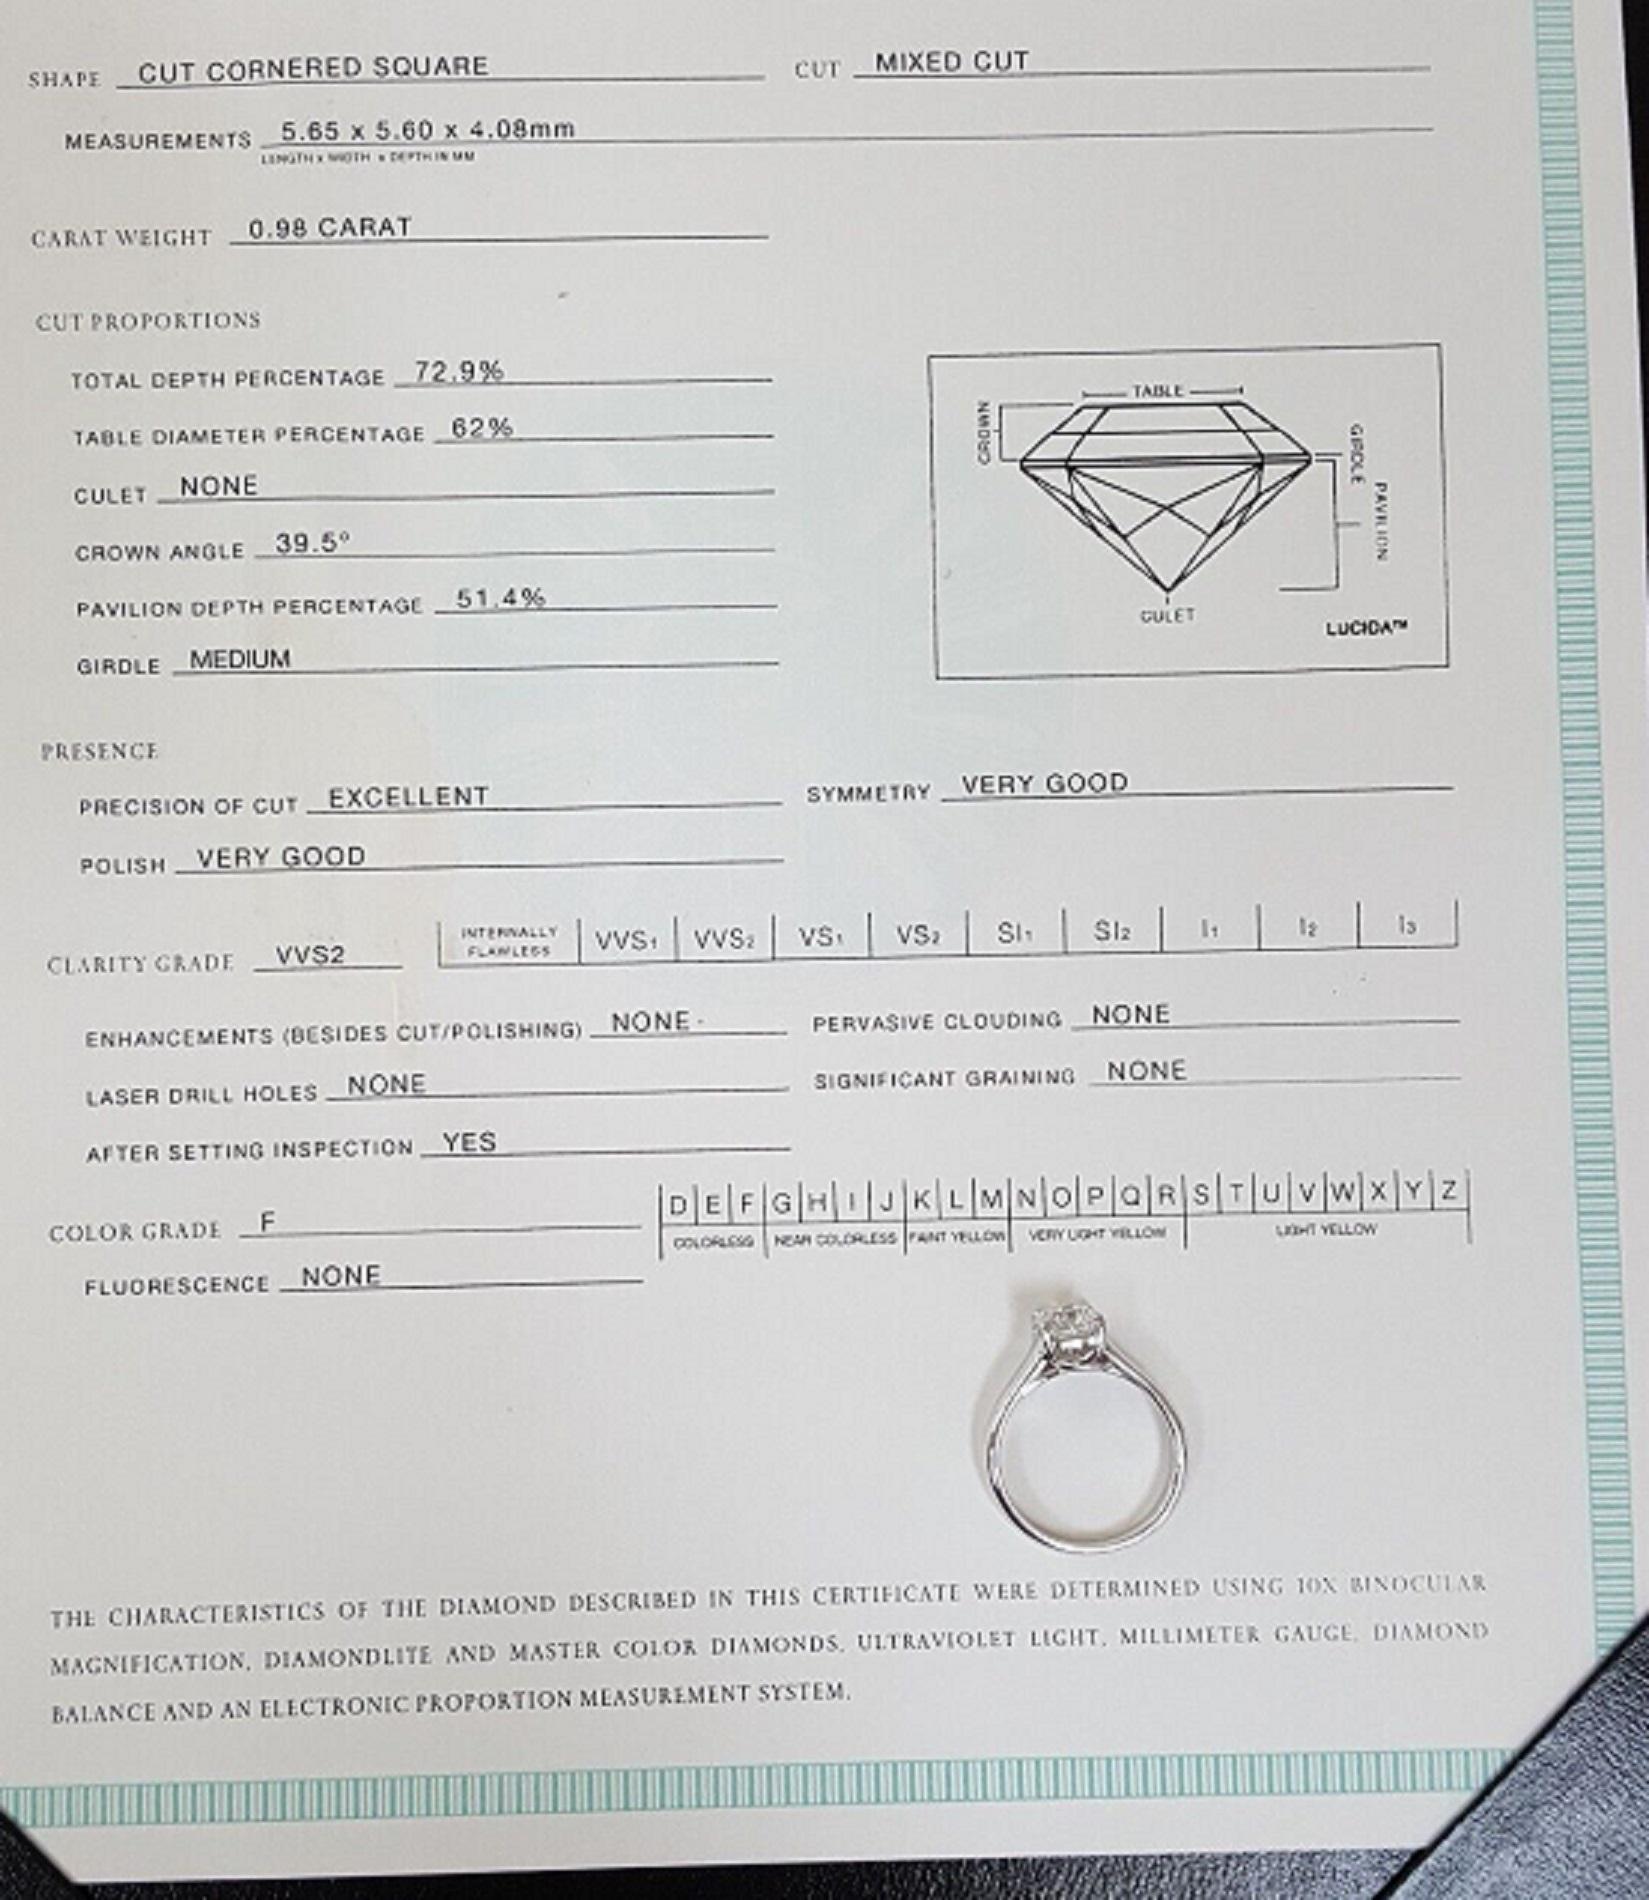 Tiffany & Co. Platinum 0.98 ct Lucida Rectangular Brilliant Cut Diamond Solitaire Engagement Ring.



The ring weighs 5.1 grams, size 5, the center stone is a Natural 0.98 ct Lucida Square Brilliant Cut diamond, F in color, VVS2 in clarity,